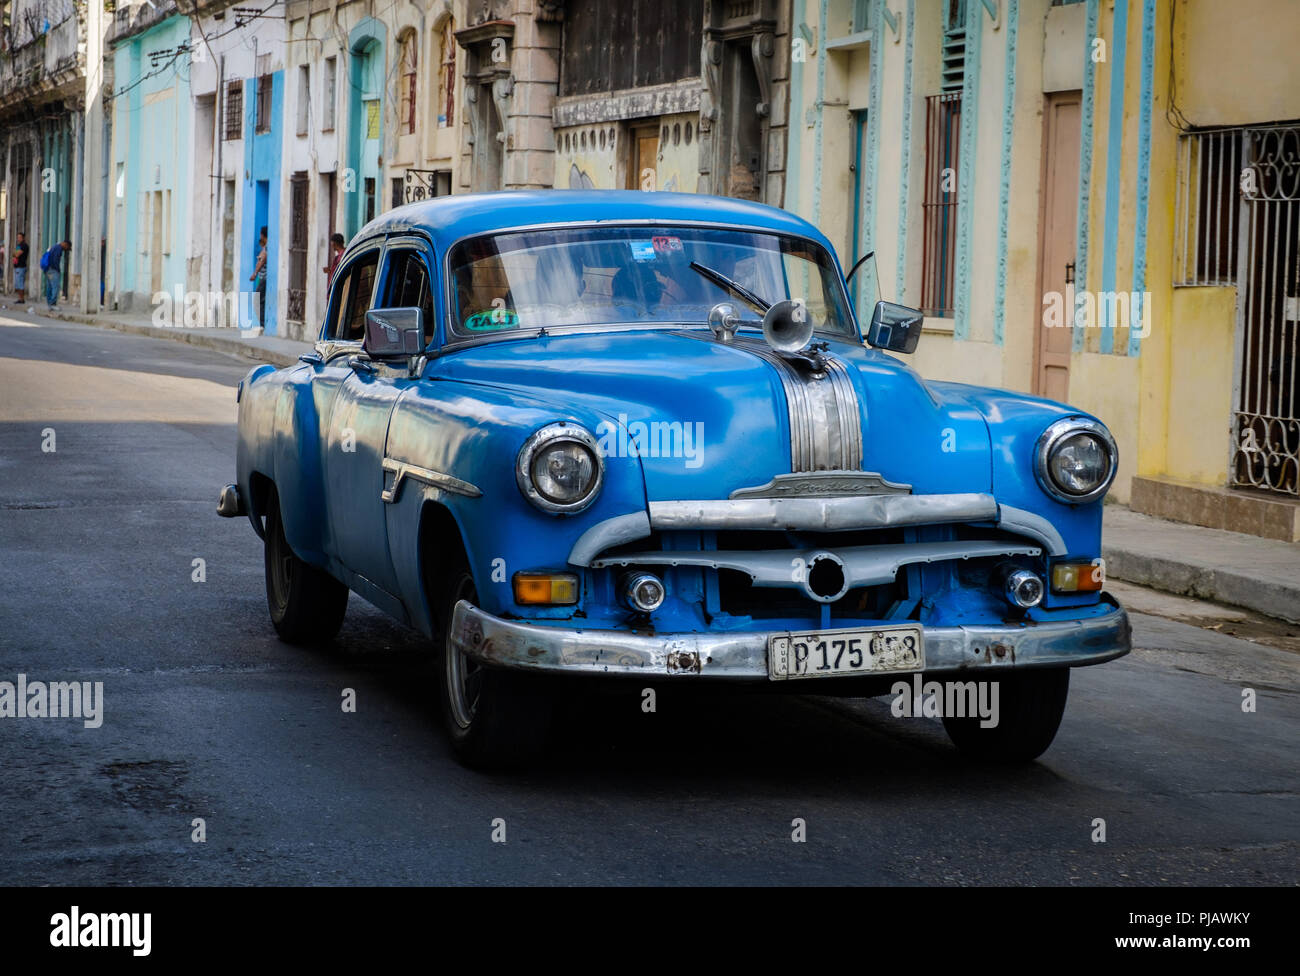 HAVANA, CUBA - CIRCA MARCH 2017: Old car drives in the streets of Havana, passing by a colorful home. Stock Photo